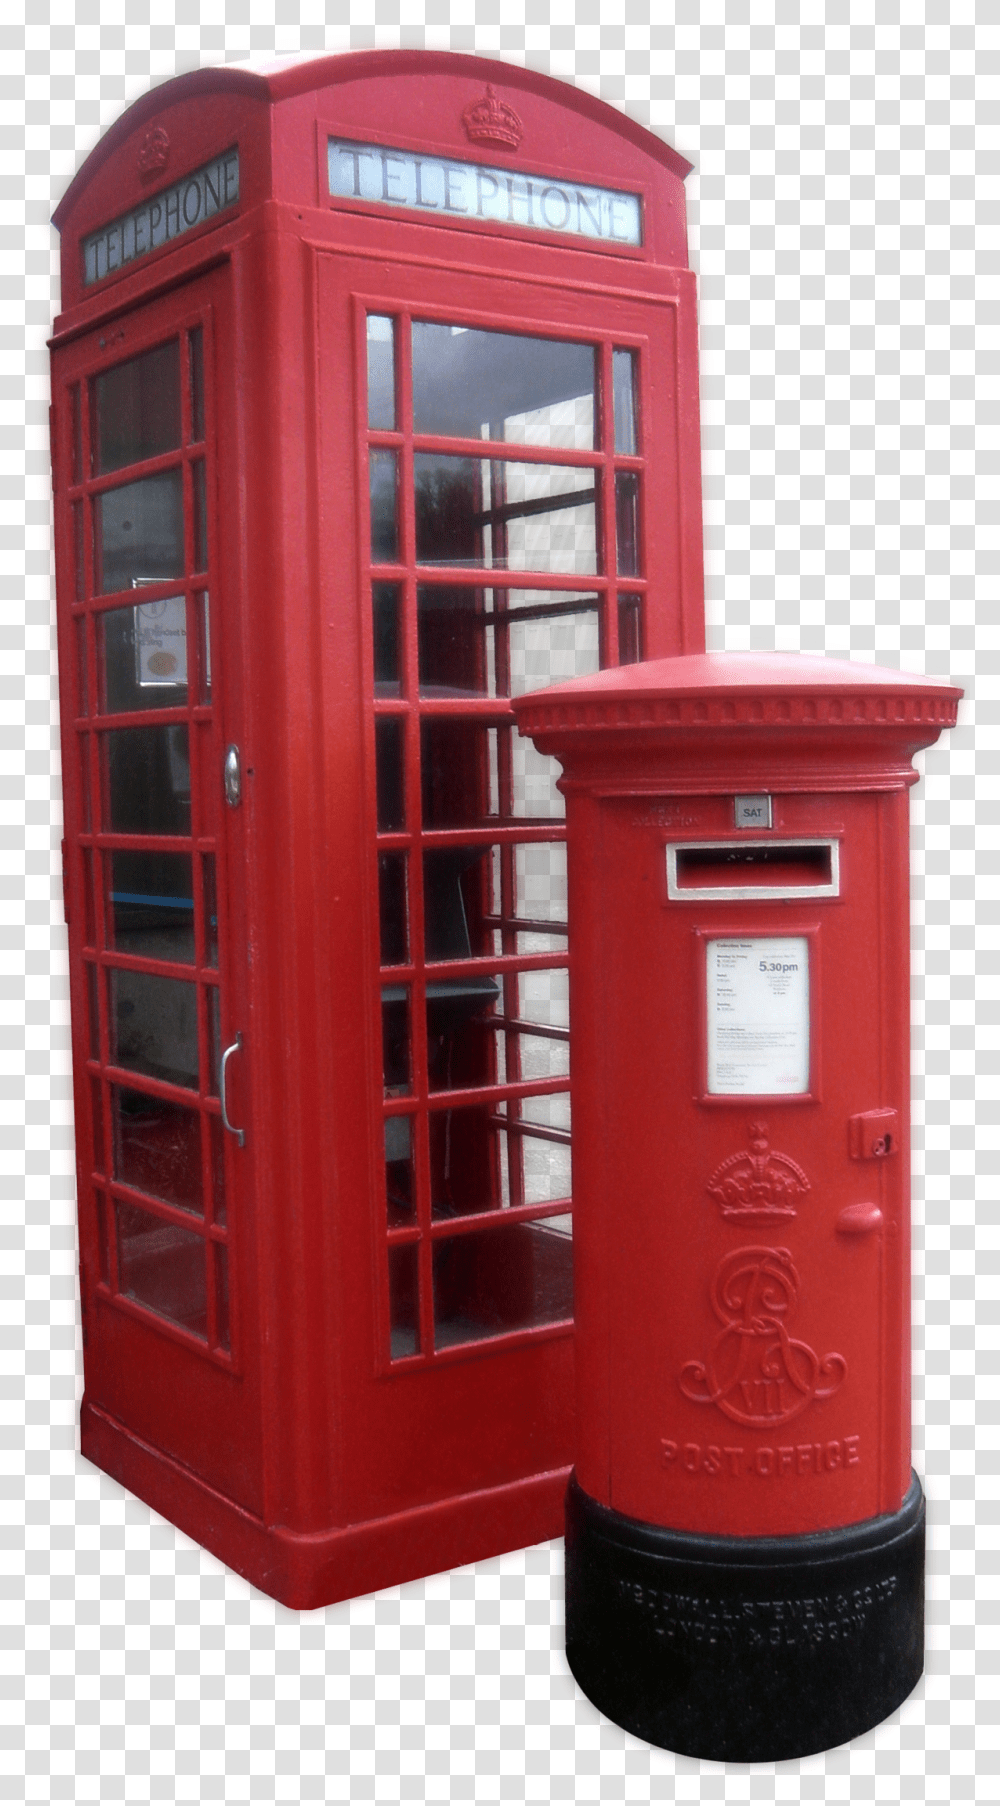 Represents The United Kingdom, Mailbox, Letterbox, Kiosk, Phone Booth Transparent Png